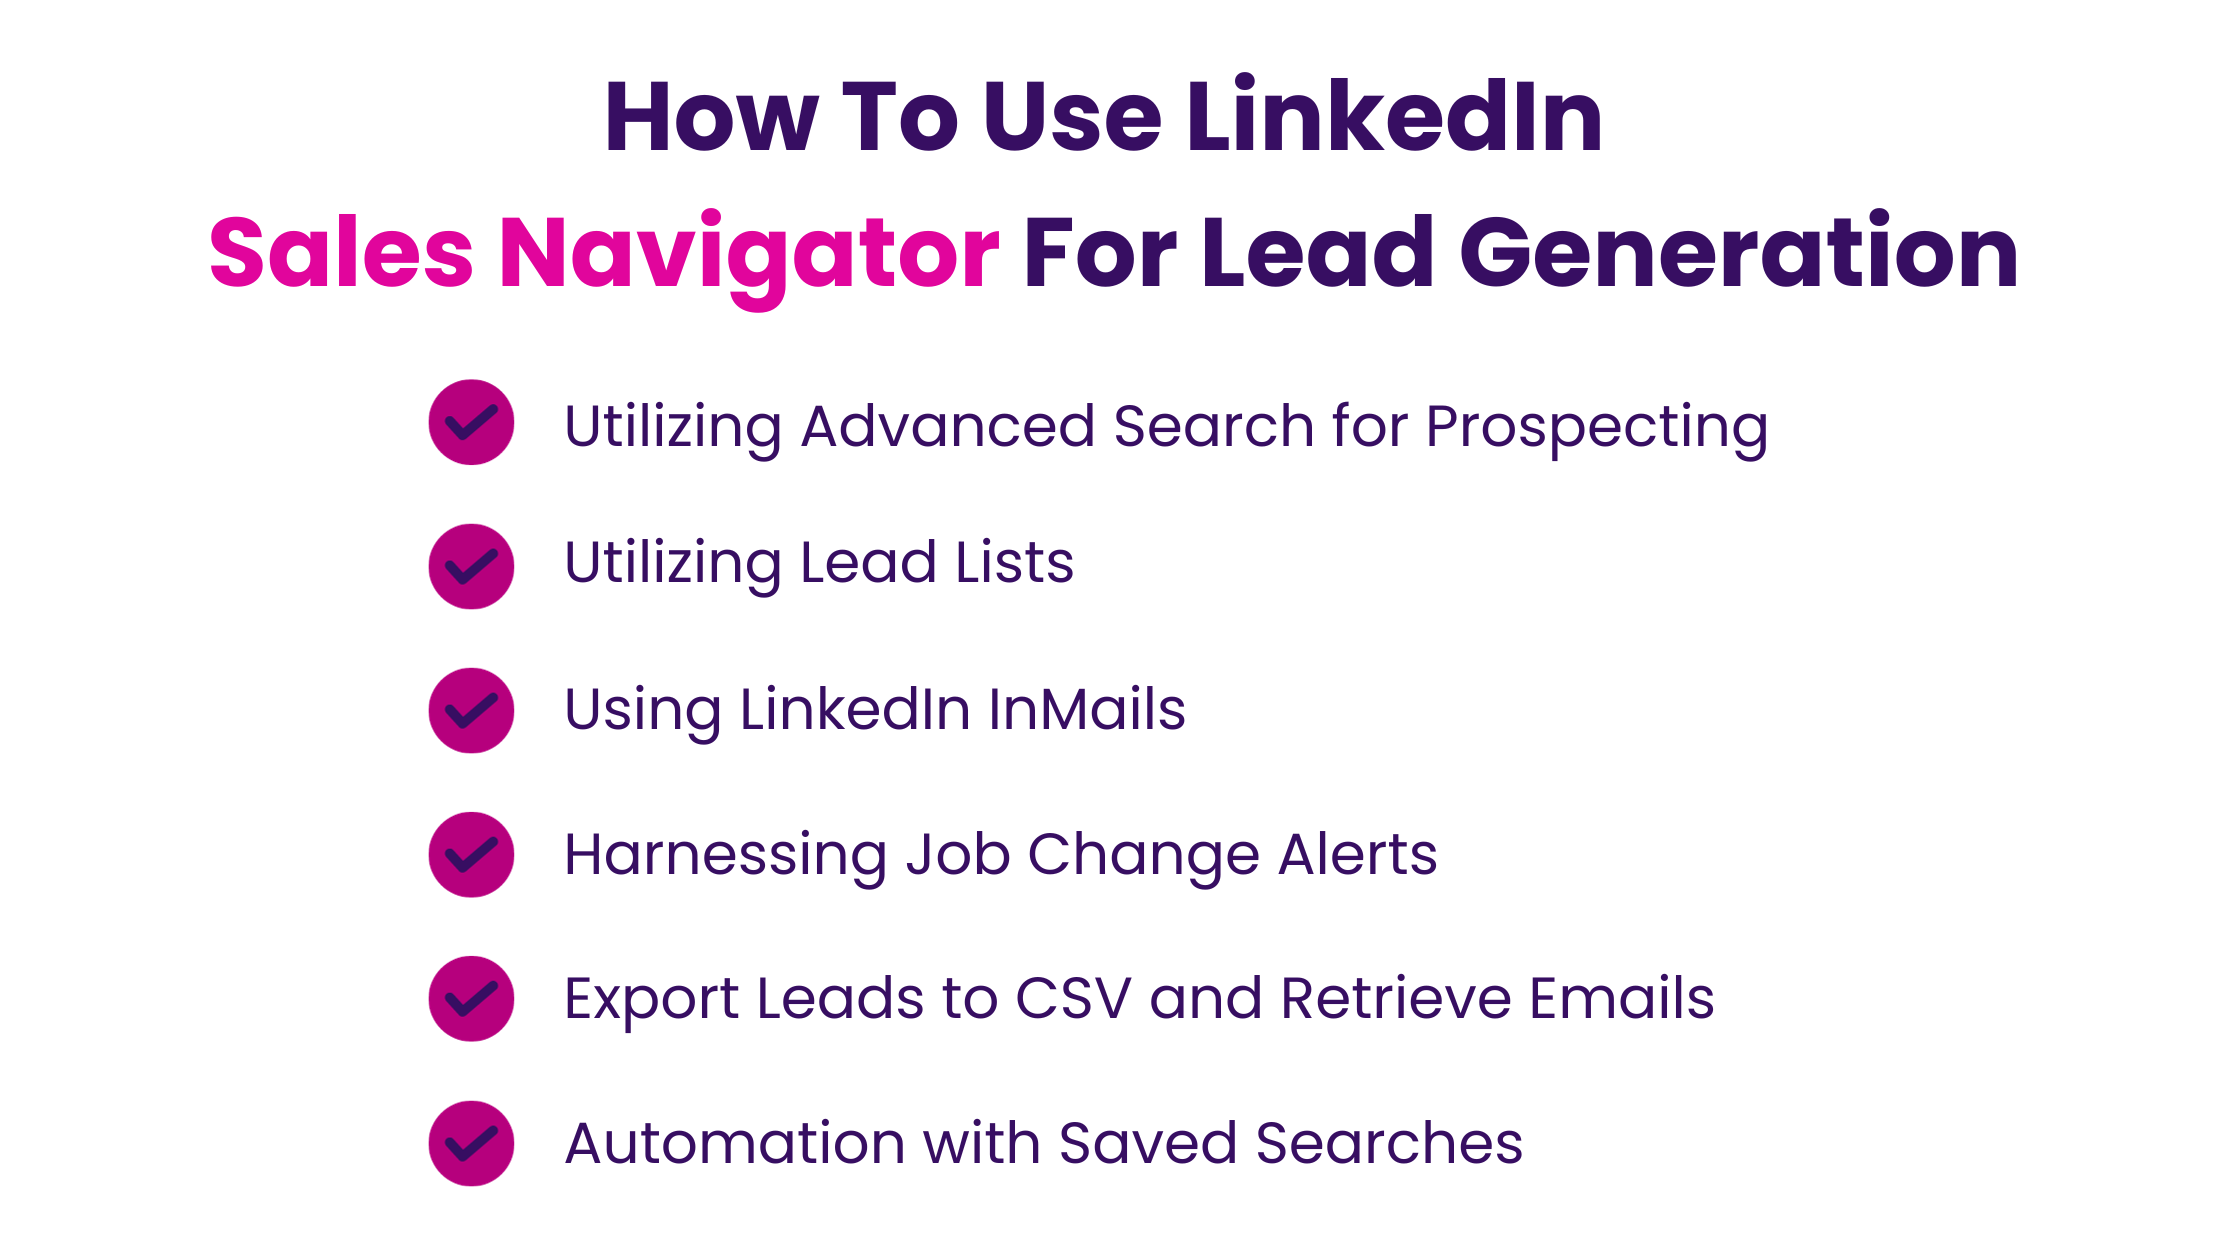 How To Use LinkedIn Sales Navigator For Lead Generation